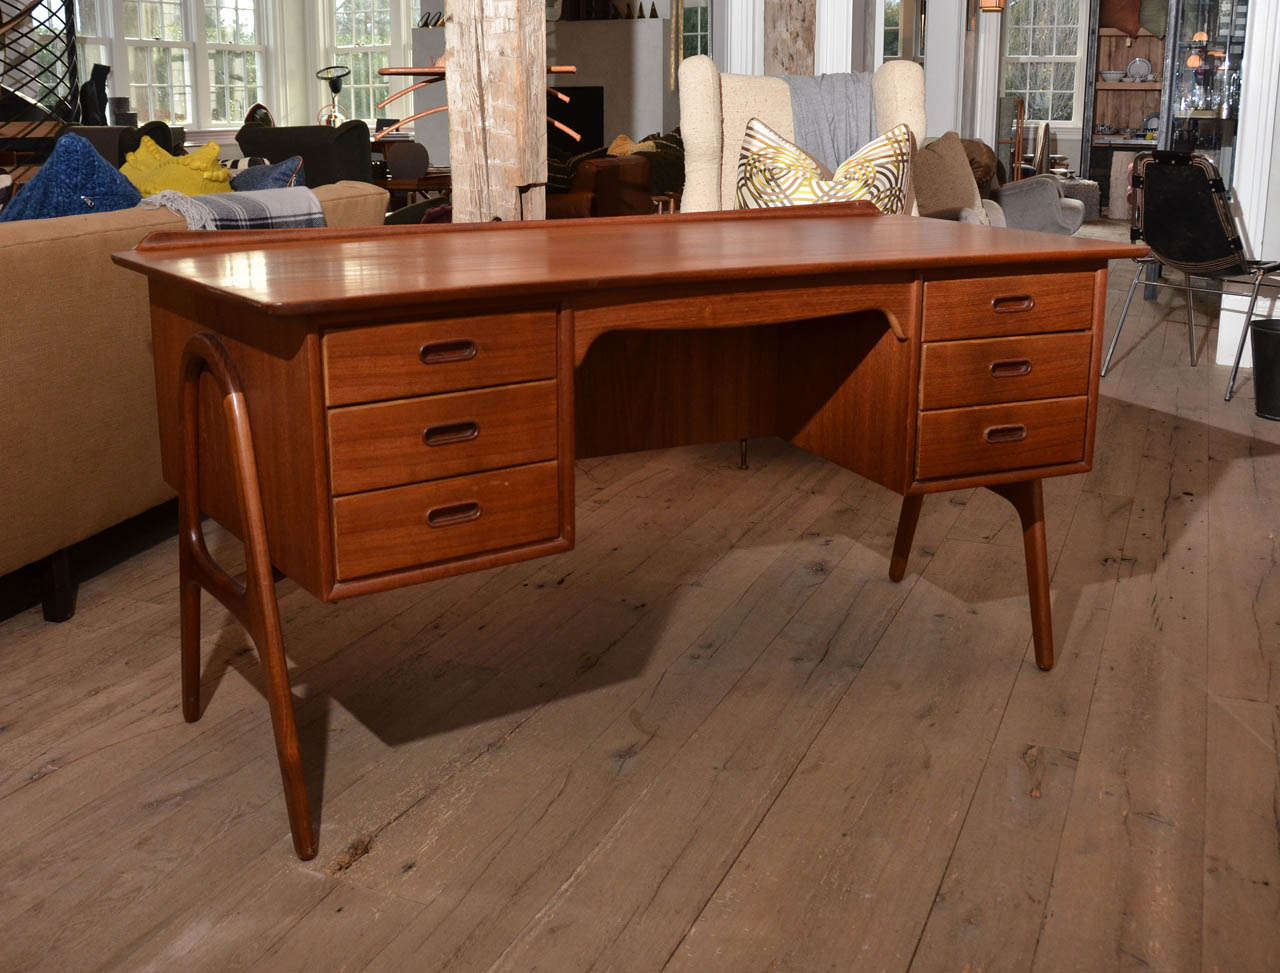 Beautiful crafted 1960's Danish teak desk by Svend Aage Madsen it features three drawers on each side which allows for maximum storage . With an integrated book shelve on the front, it makes this desk a perfect standalone piece. Curved teak legs add